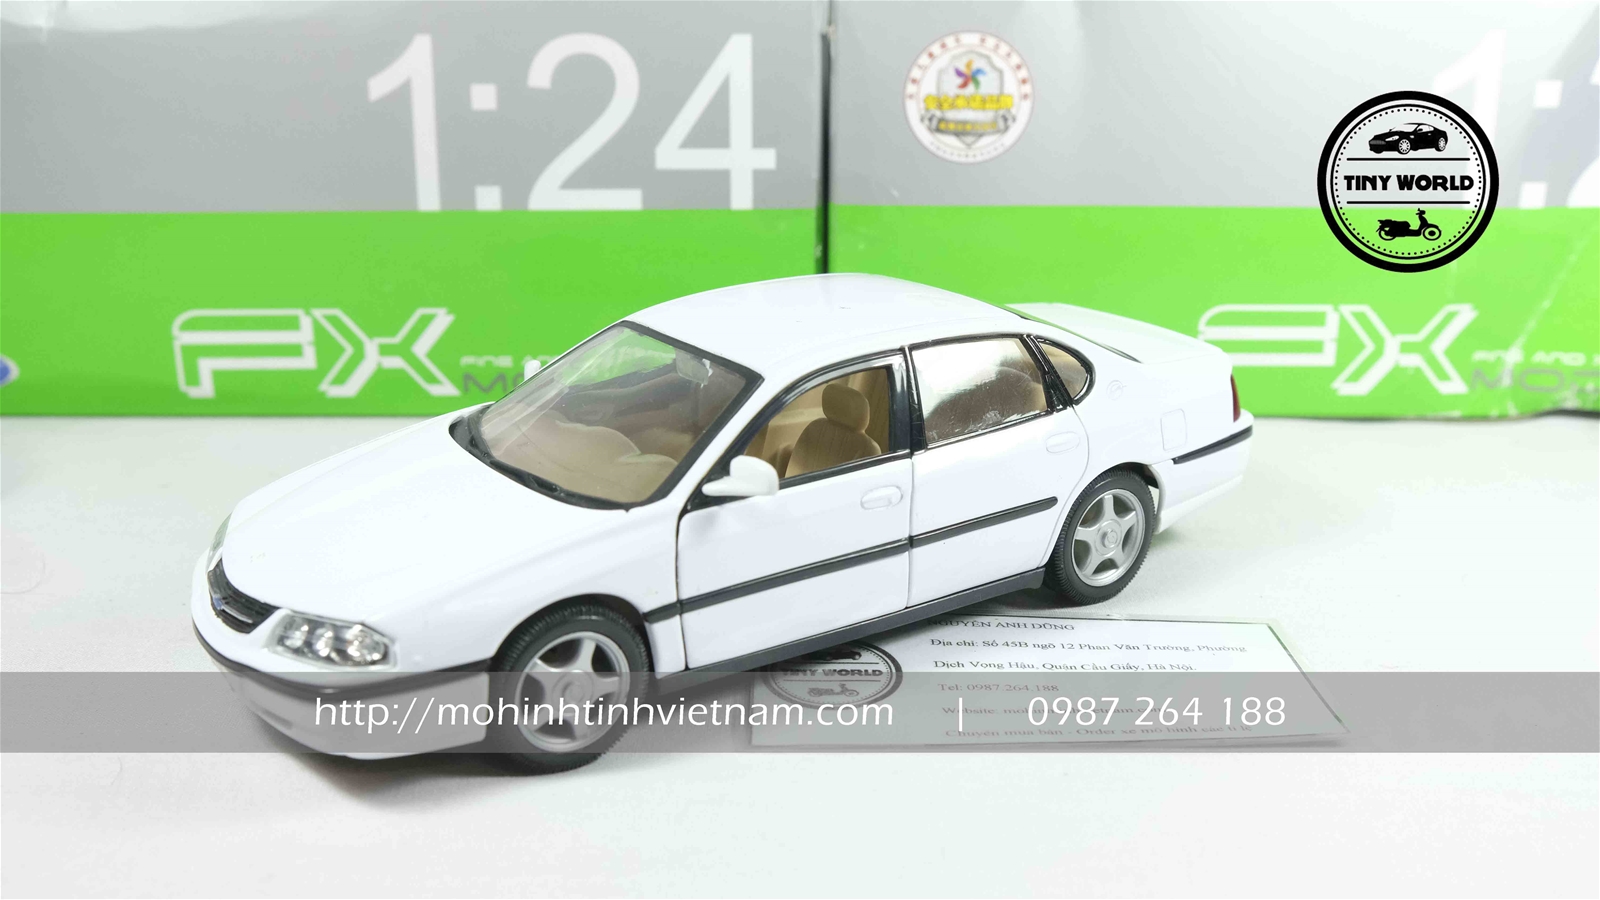 CHEVROLET IMPALA 2001 (TRẮNG) 1:24 WELLY